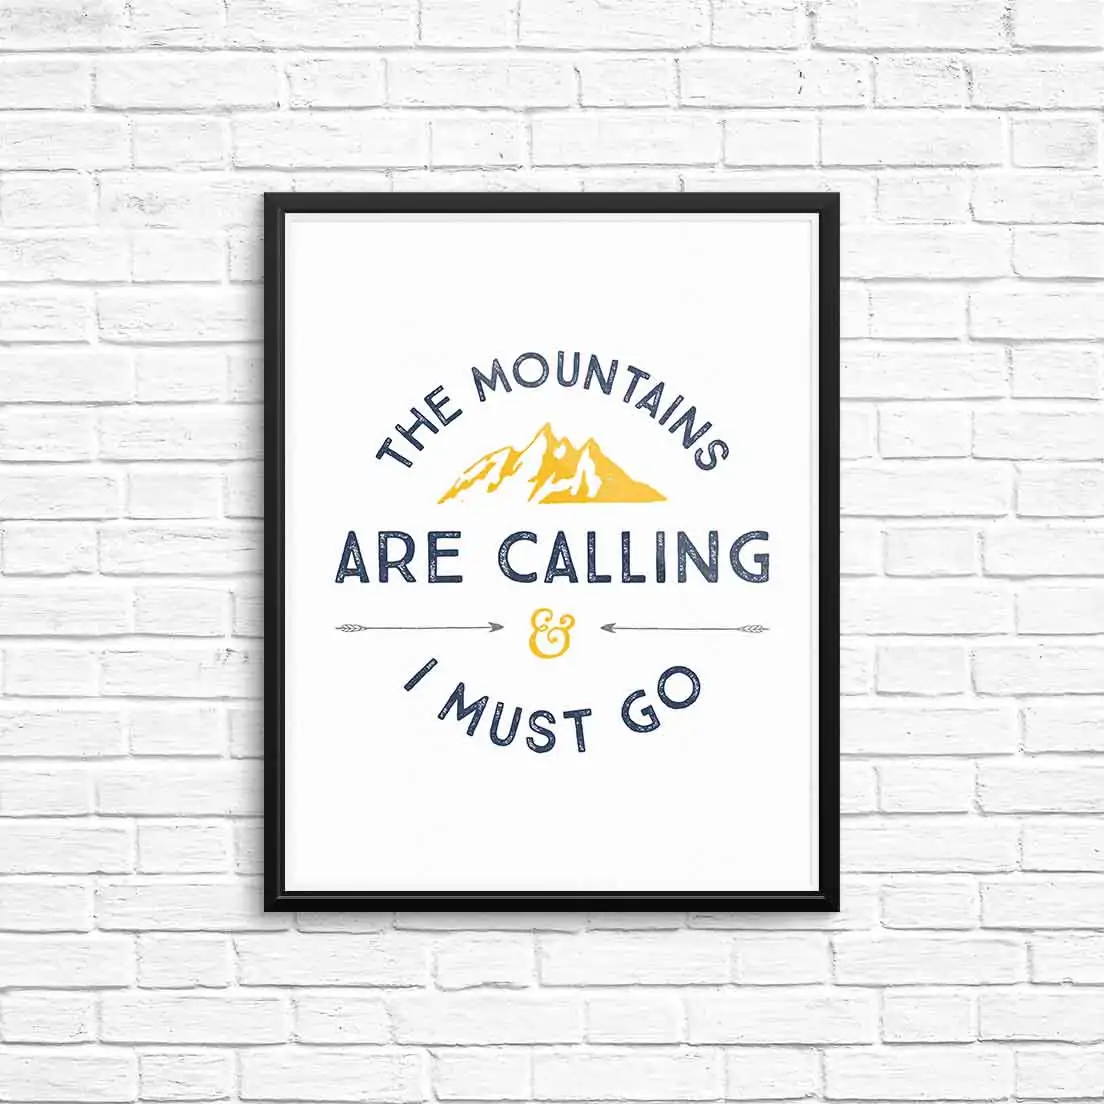 The Mountains Are Calling & I Must Go | Download this FREE printable 8x10 wall art to add a bit of rustic, outdoor charm to any room. Pinning for later! 